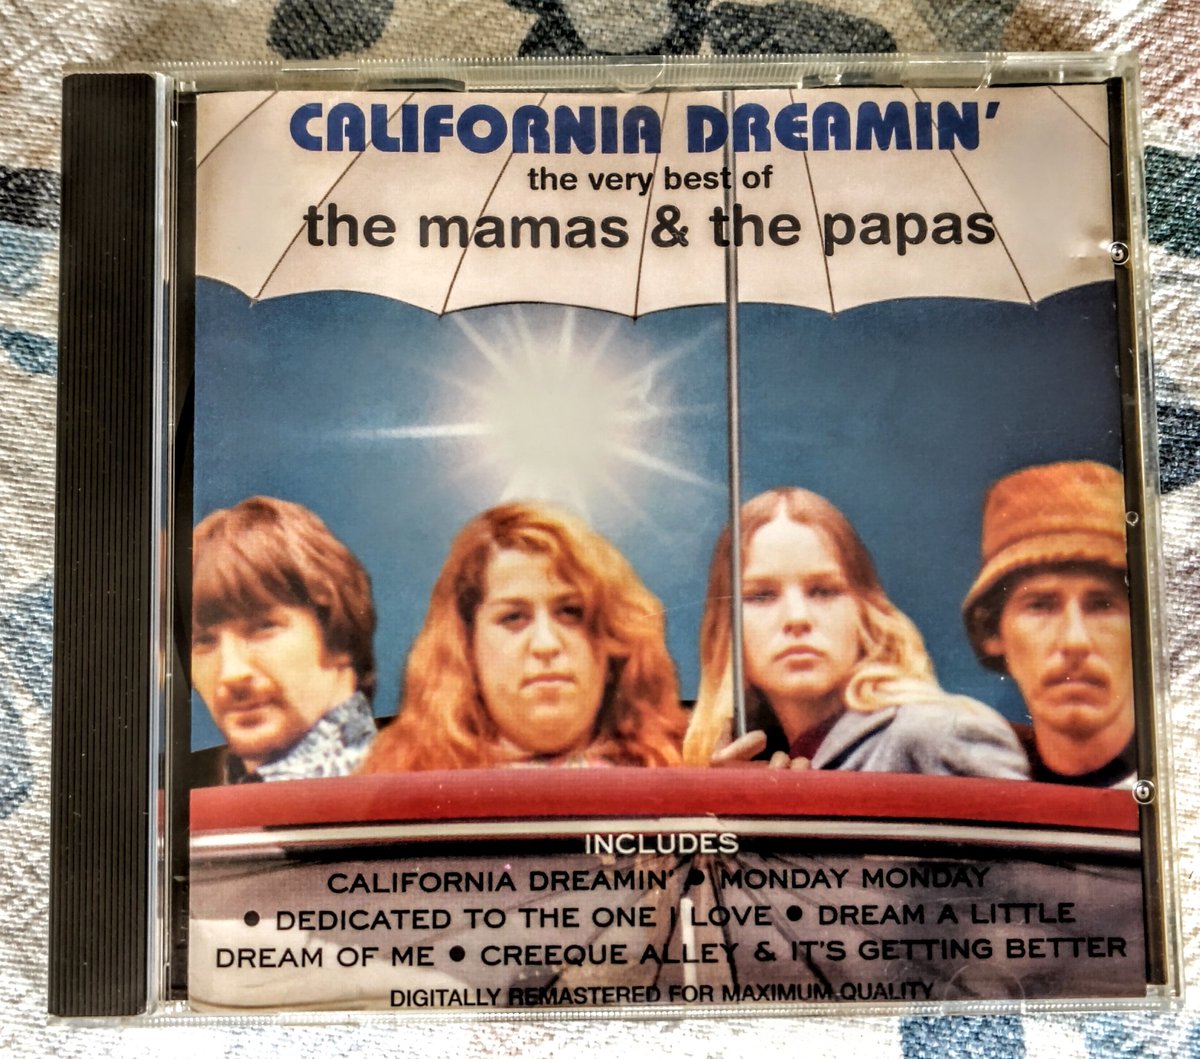 #NowPlaying #Homelistening California Dreamin': The Very Best of the Mamas & the Papas from 1995 on Polygram TV, saw a YouTube video with Mama Cass, Lulu and Dudley Moore earlier so this was always getting played tonight